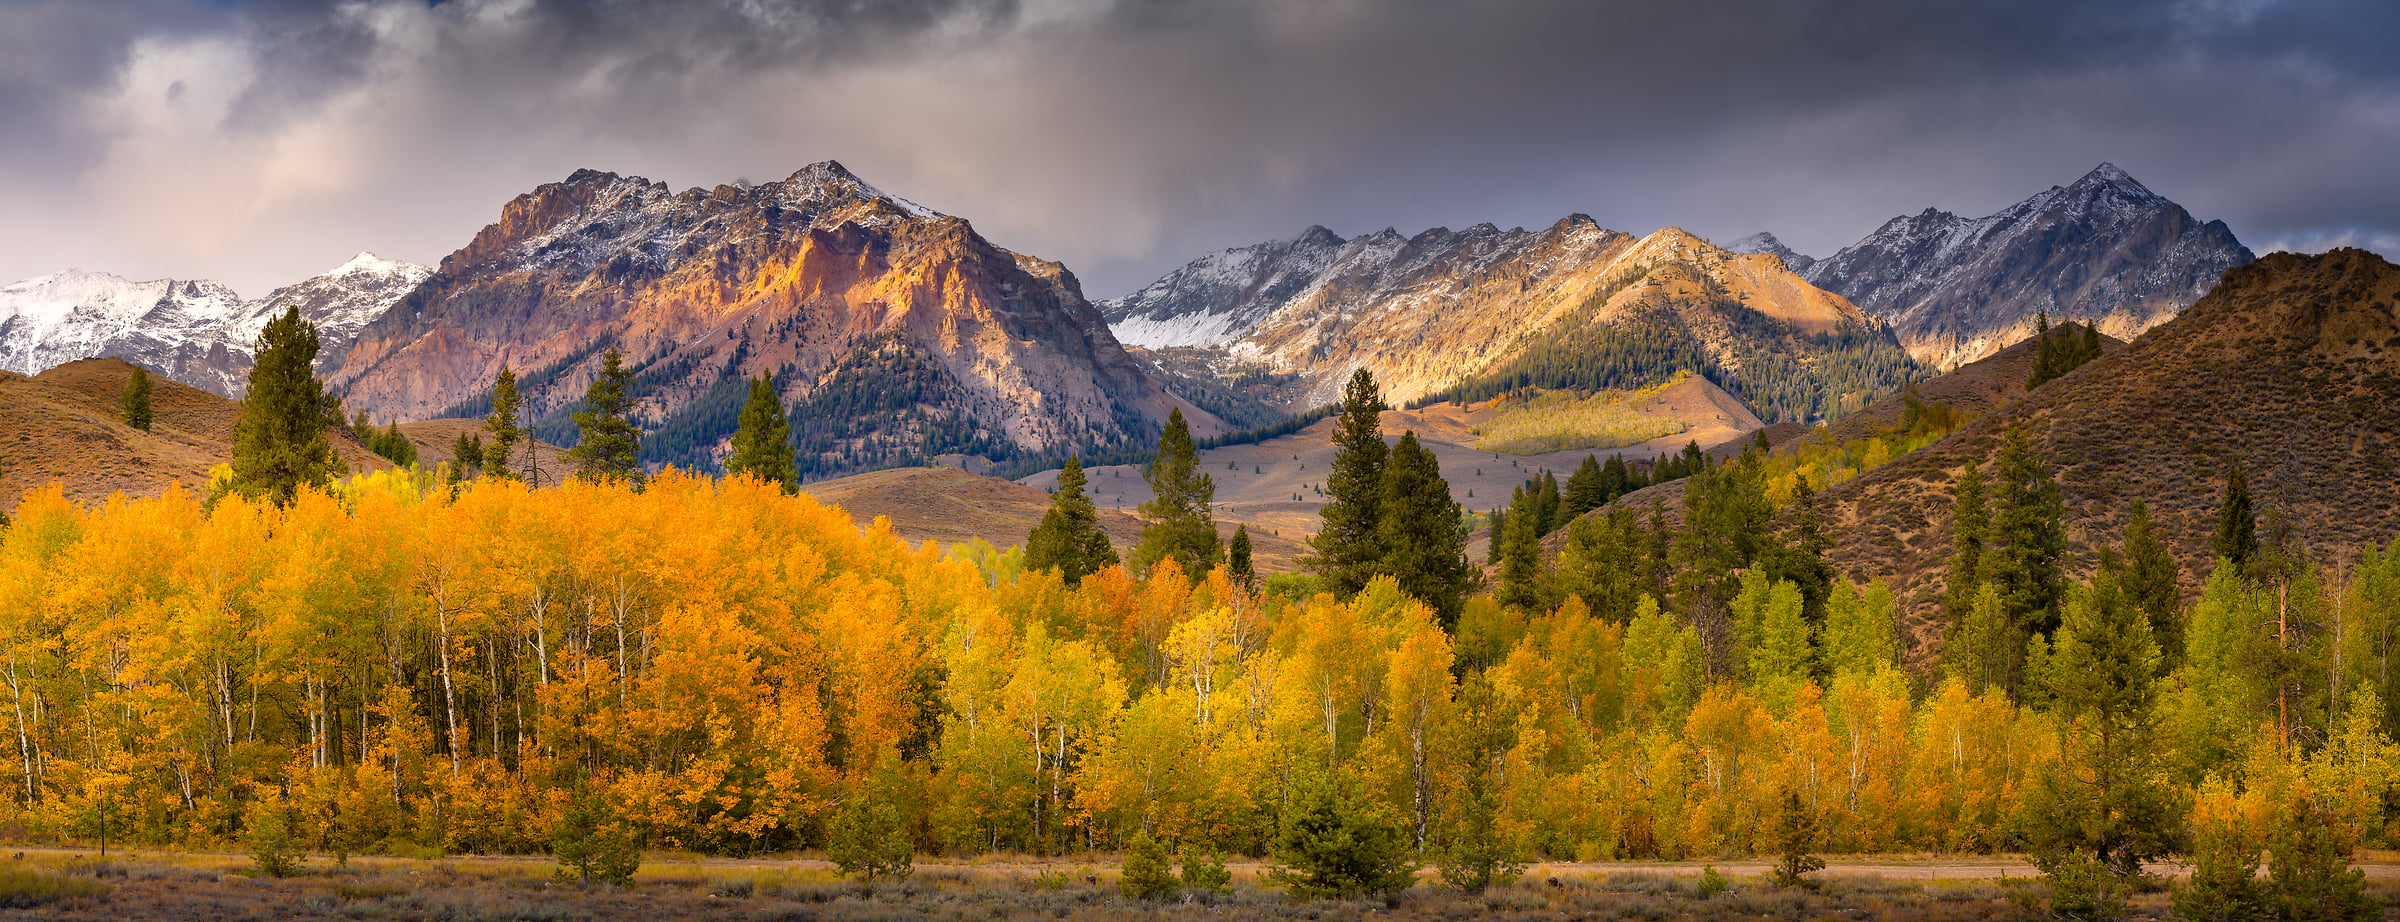 264 megapixels! A very high resolution, large-format VAST photo print of aspen trees in front of a mountain range in autumn; landscape photograph created by Jeff Lewis in Ketchum, Idaho.